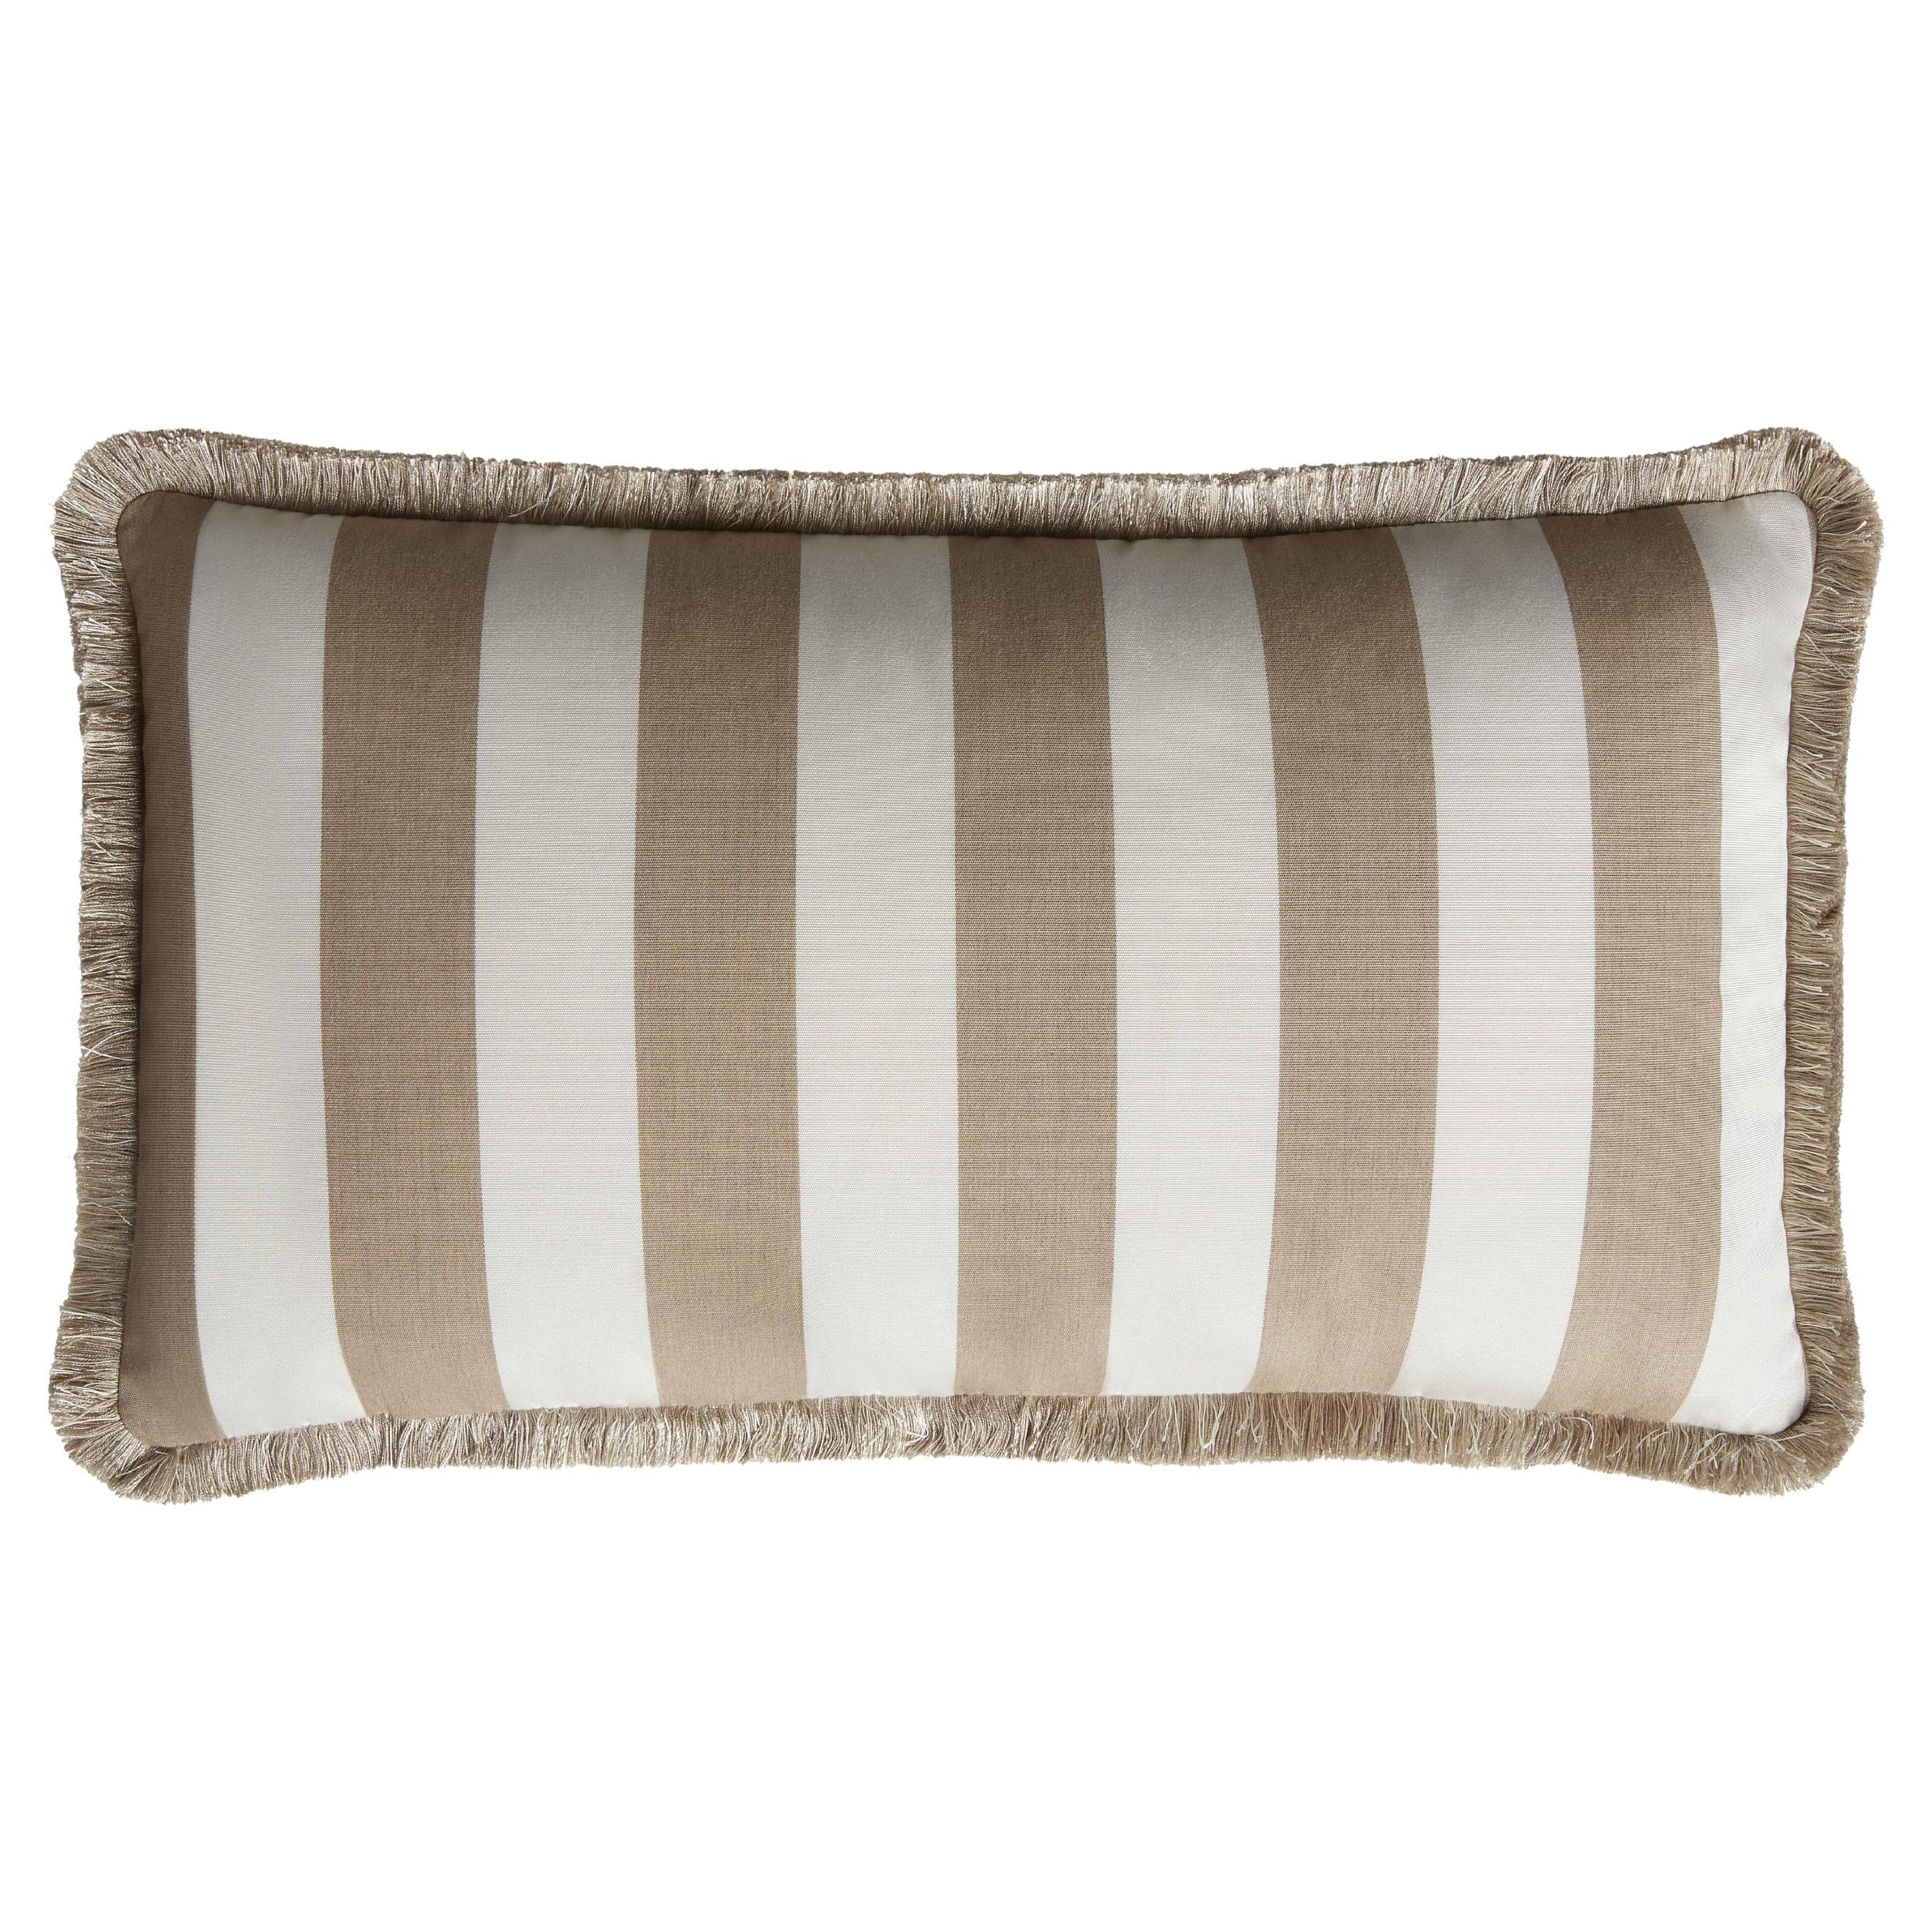 Striped Happy Pillow Outdoor with Fringes Beige and White 